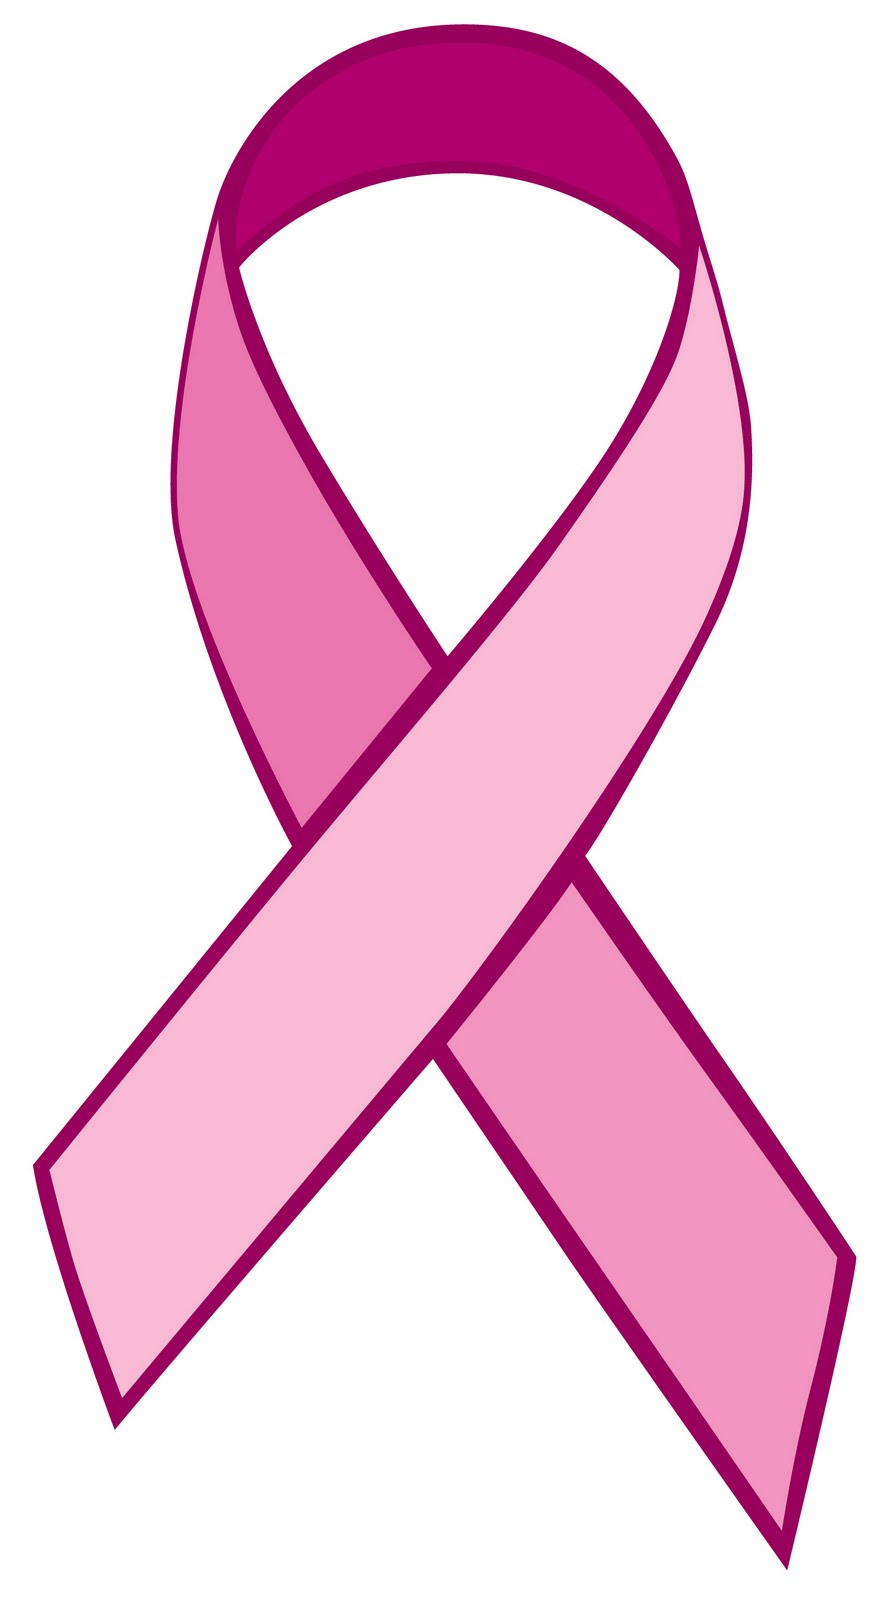 Breast Cancer Ribbon Outline - ClipArt Best